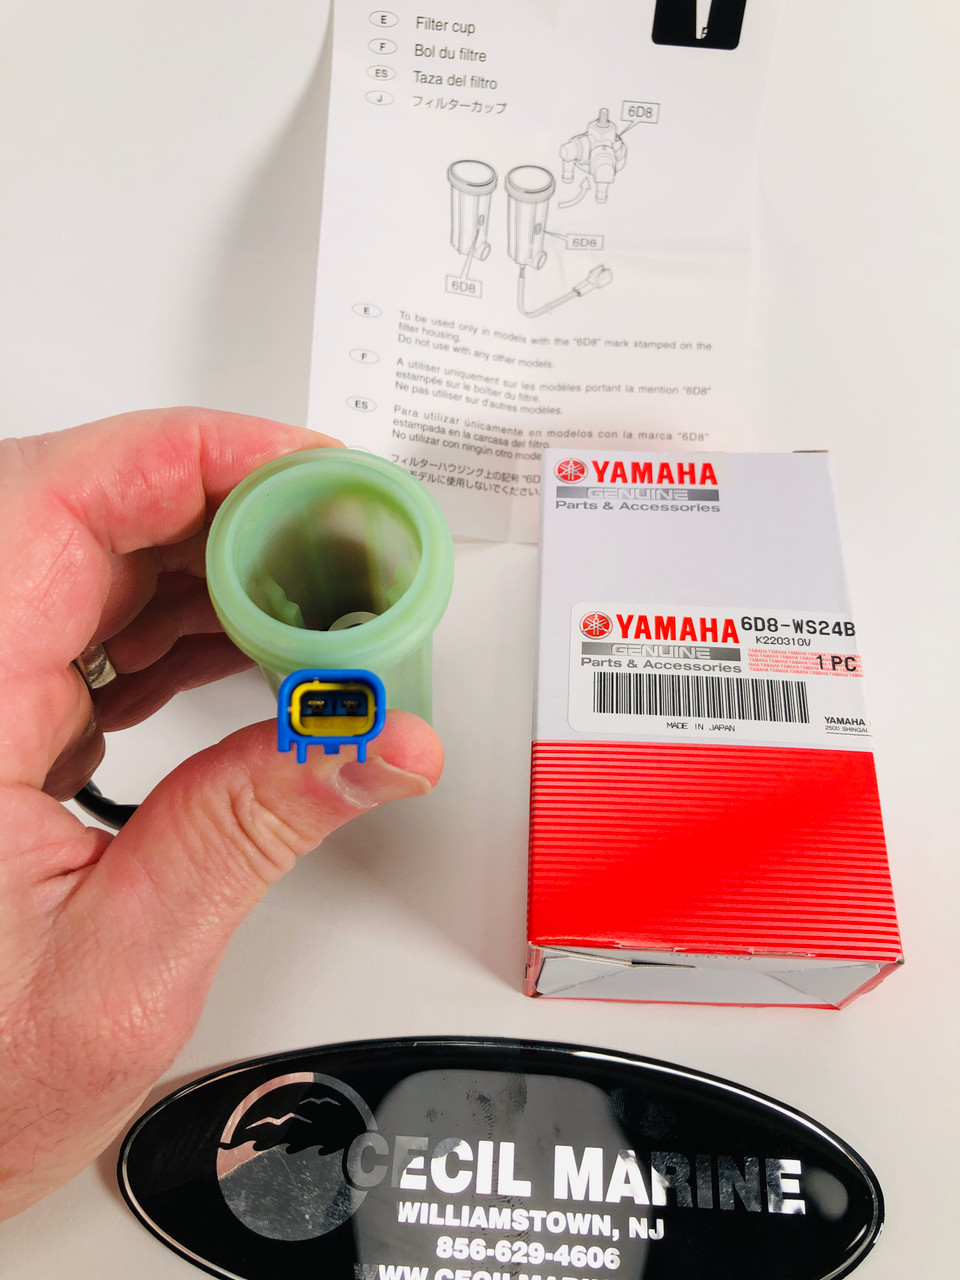 $99.99* GENUINE YAMAHA no tax* FUEL FILTER CUP 6D8-WS24B-00-00  *In Stock And Ready To Ship!